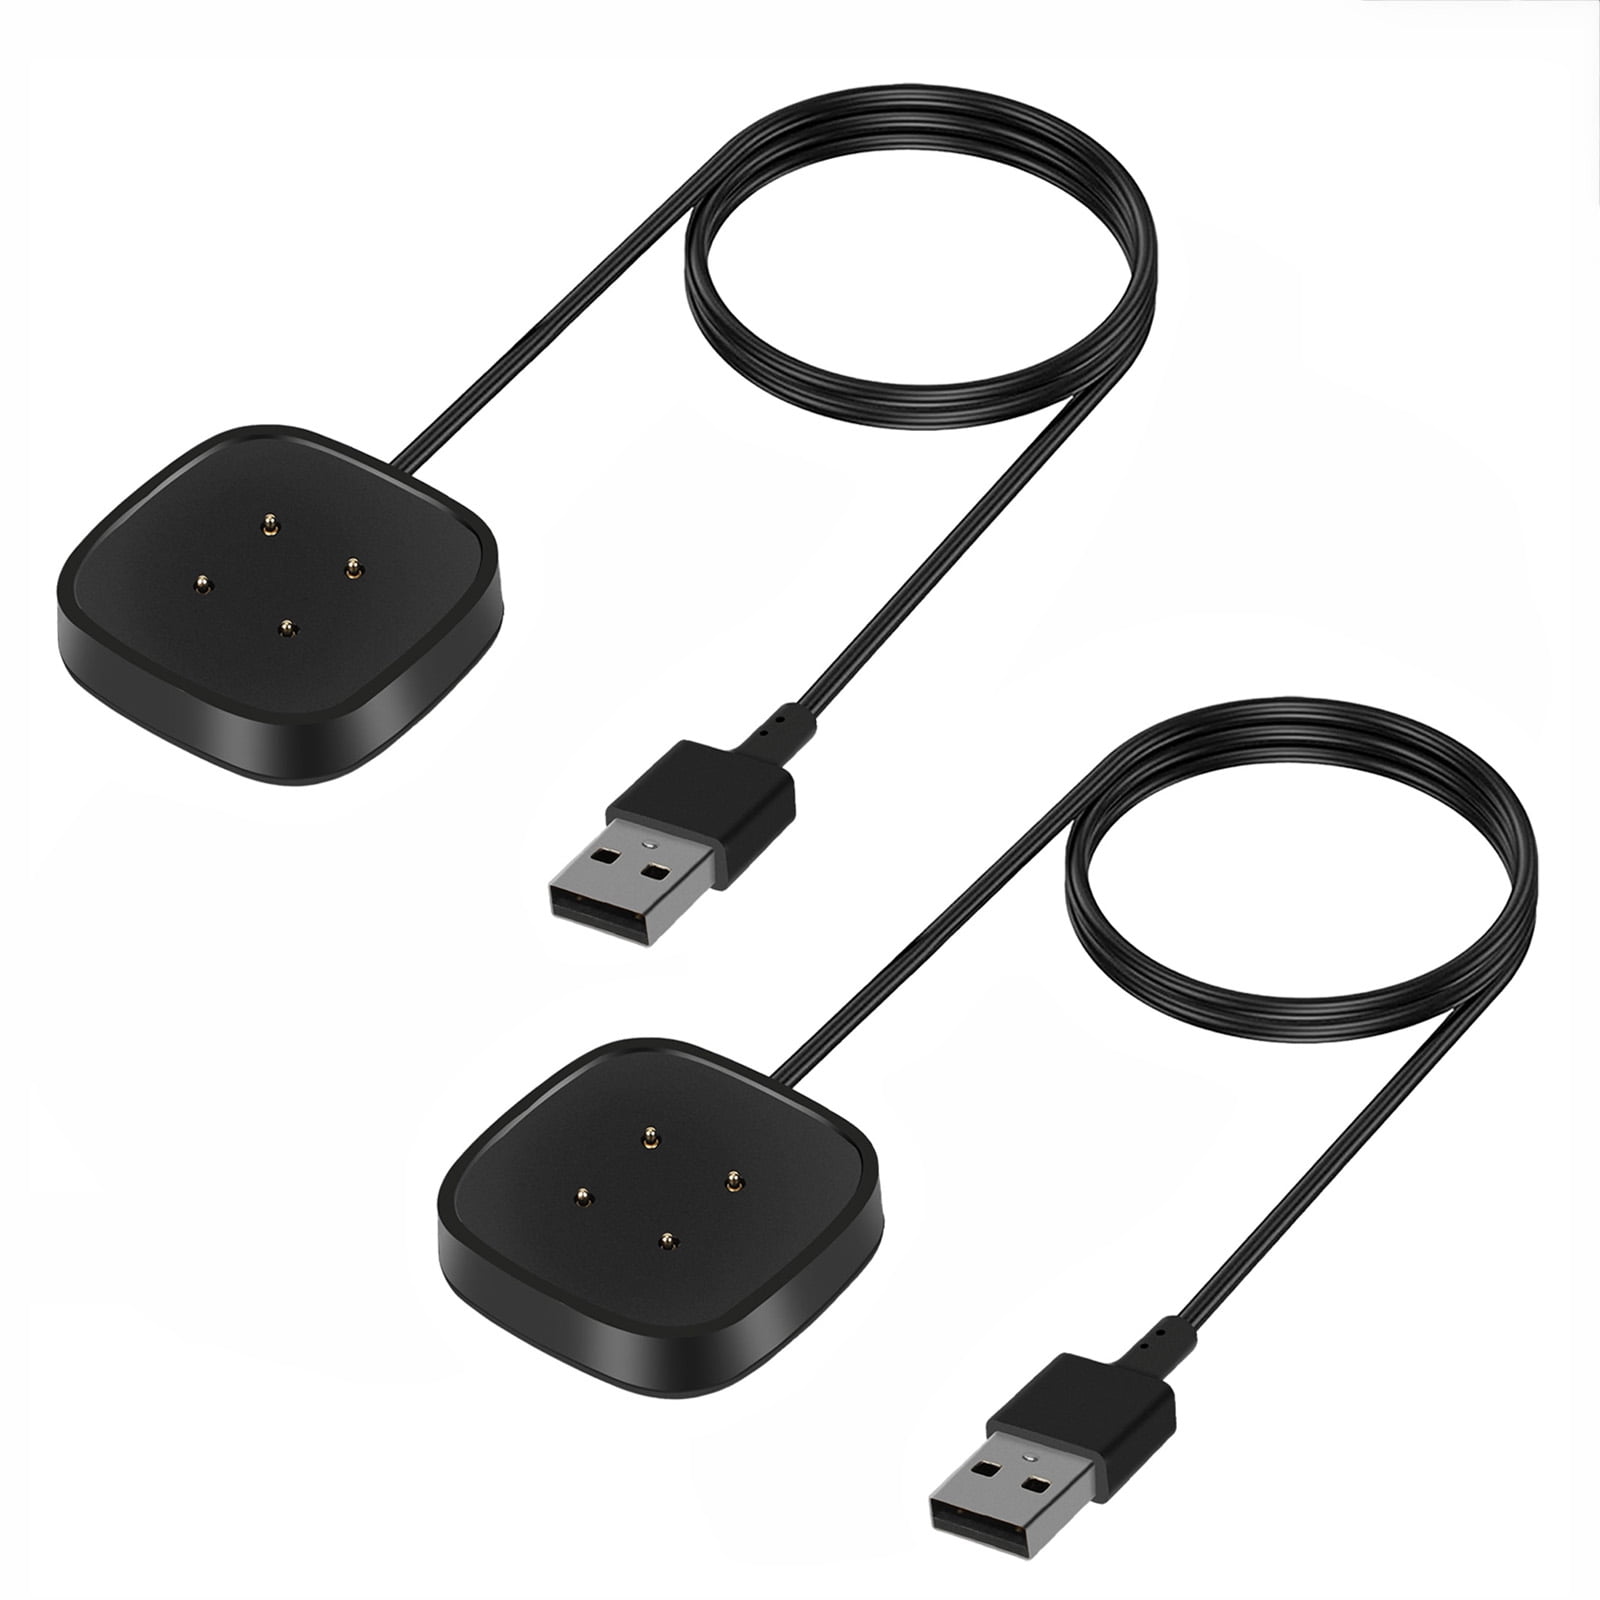 Universal Smartwatch Charger for Fitbit Versa Lite/Versa with 1m USB Cable 